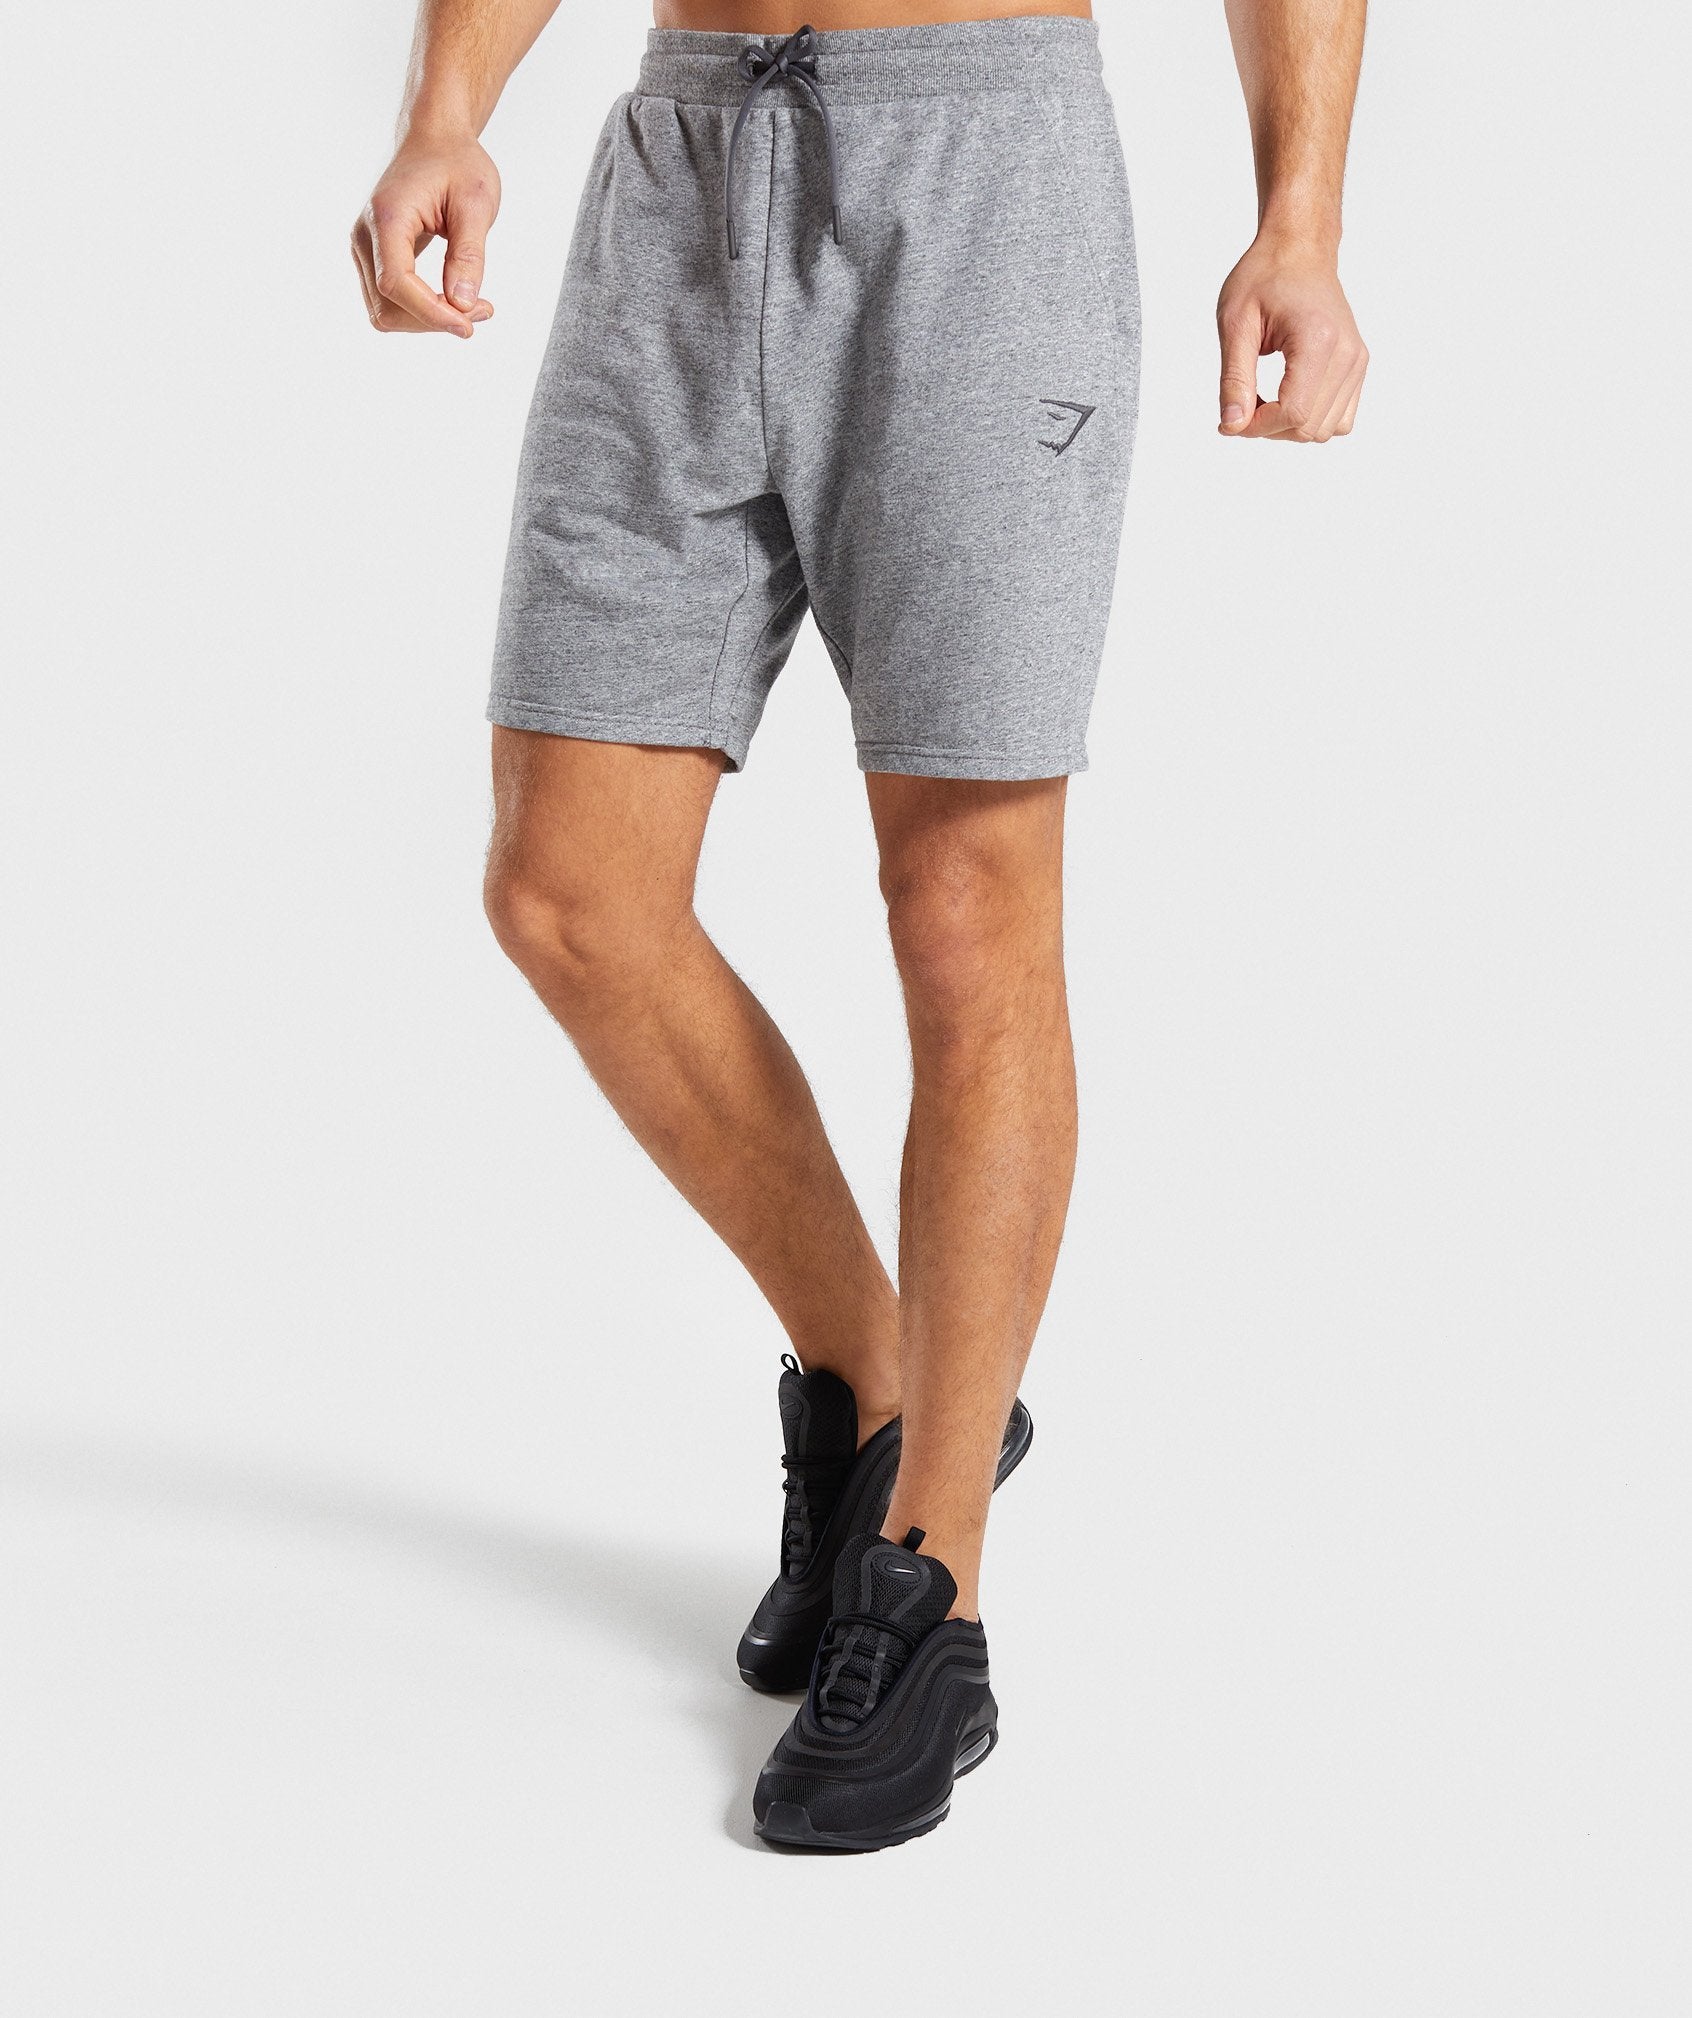 Lounge Shorts in Grey Marl - view 1